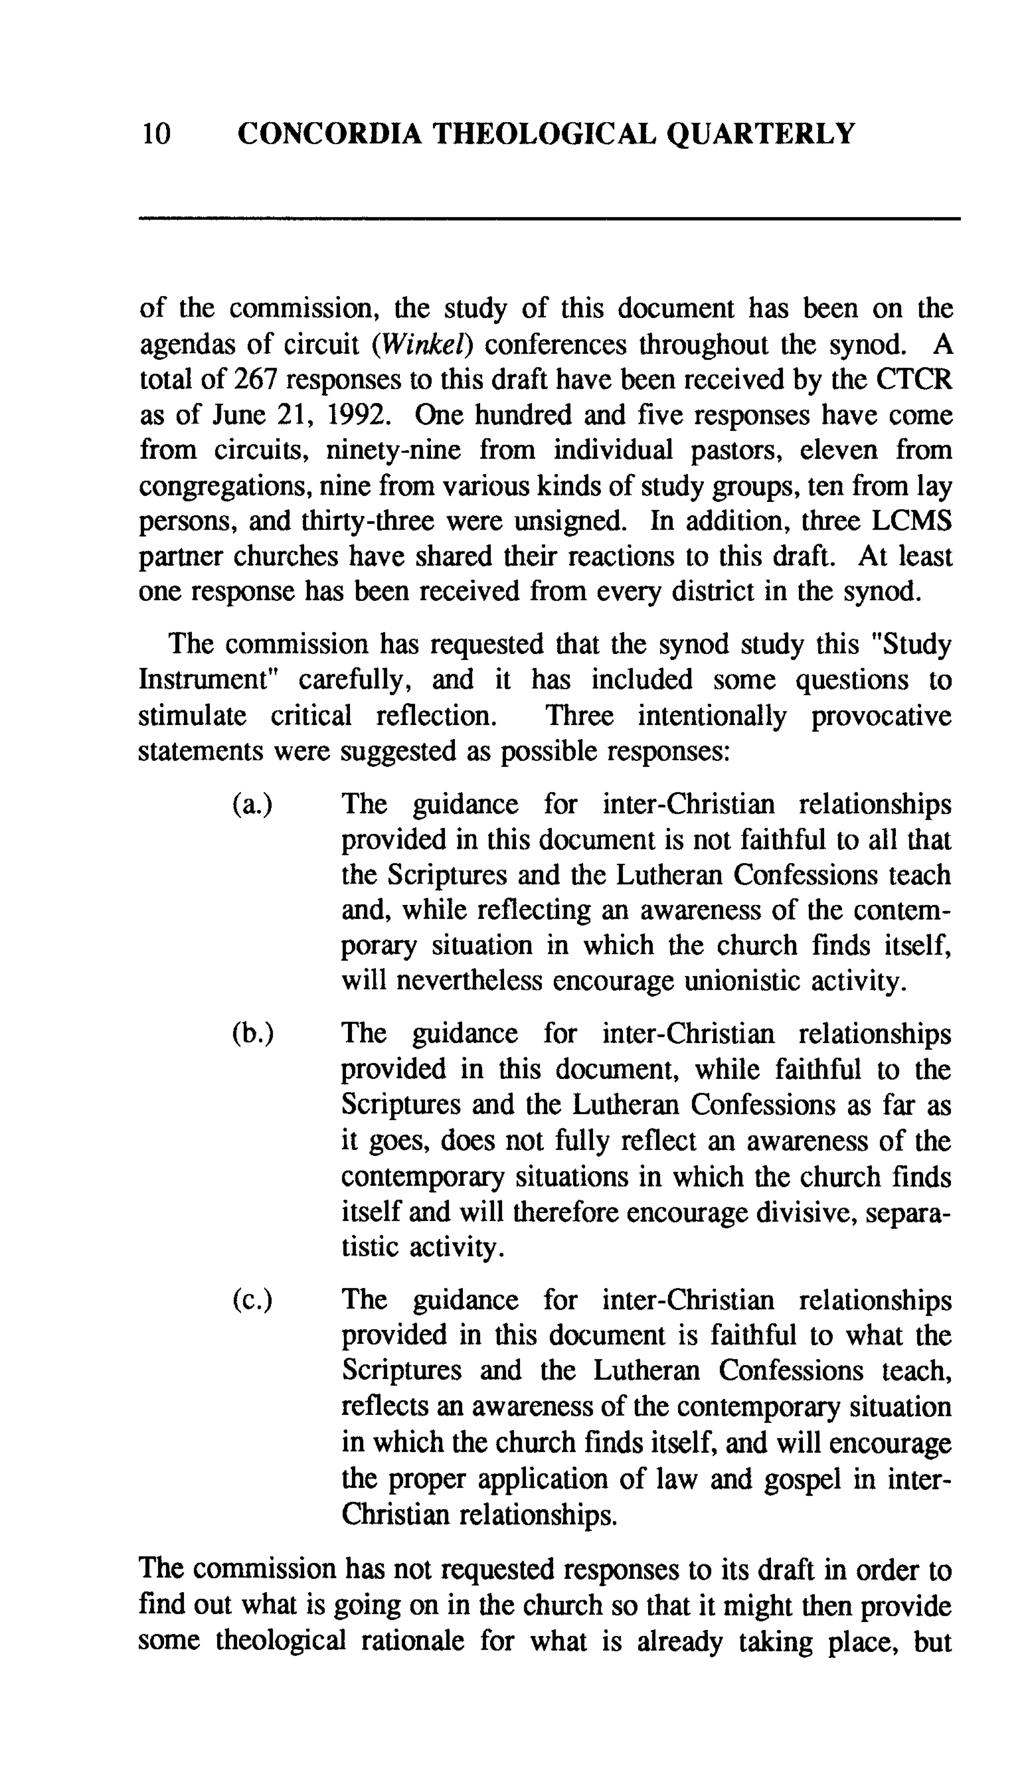 10 CONCORDIA THEOLOGICAL QUARTERLY of the commission, the study of this document has been on the agendas of circuit (Winkel) conferences throughout the synod.